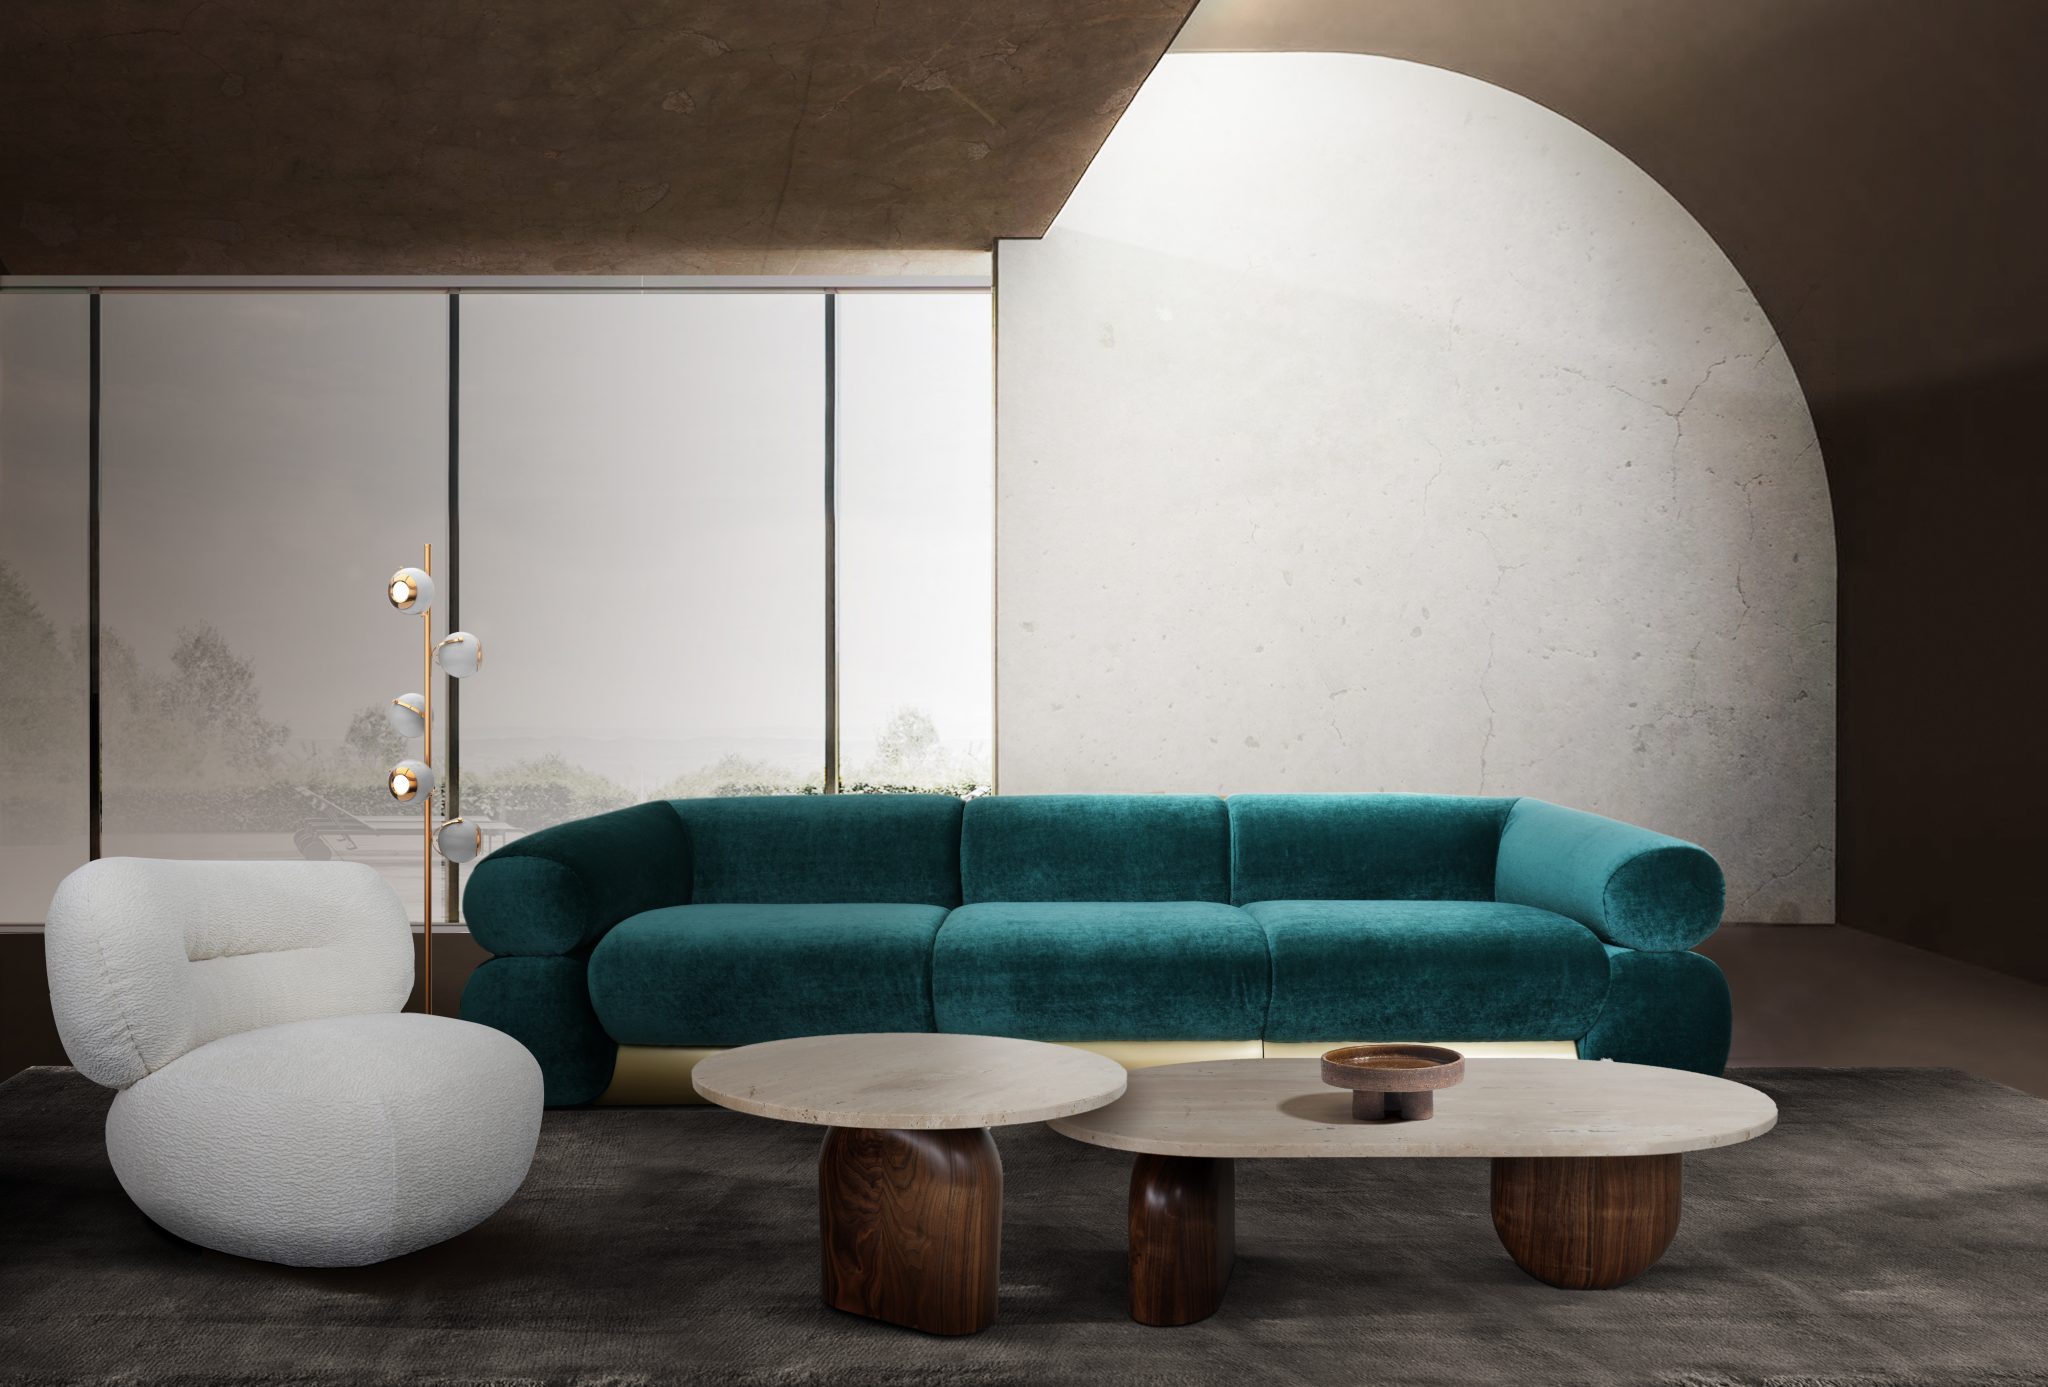 SOPHISTICATED MID-CENTURY MODERN DESIGN FOR YOUR LIVING ROOM